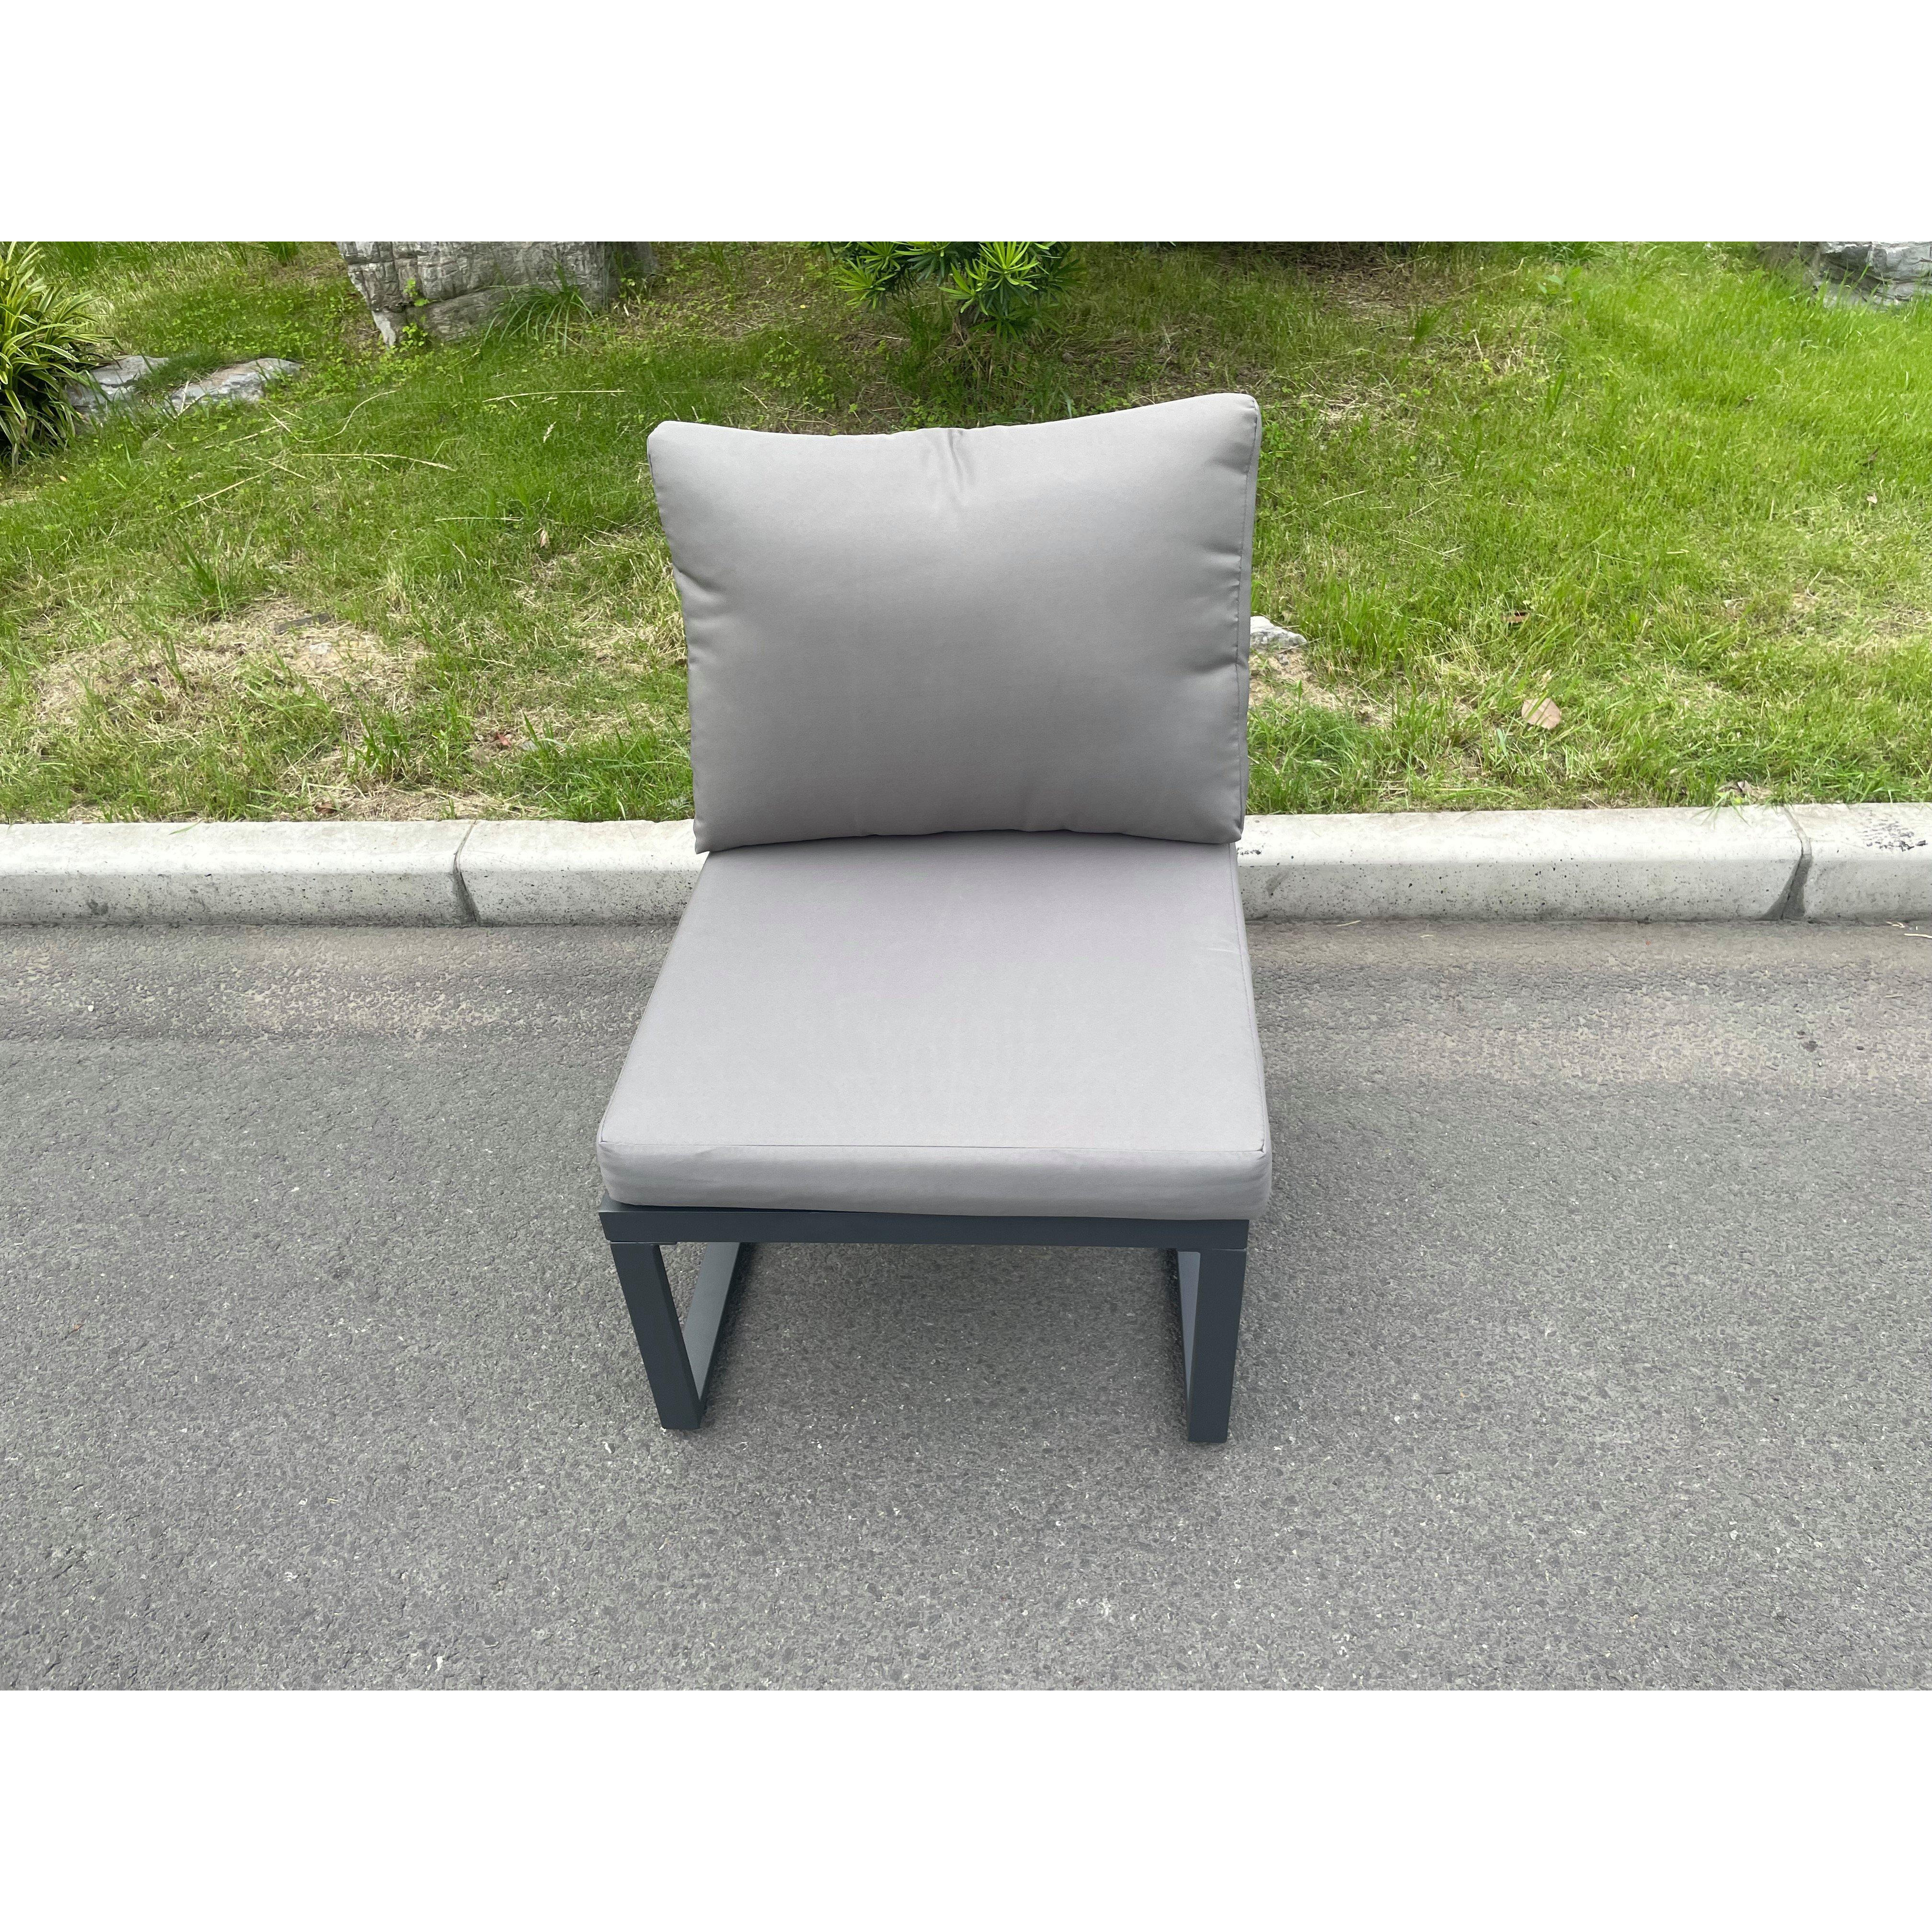 Aluminum Outdoor Garden Furniture Armless Sofa Chair With Seat And Back Cushion Dark Grey - image 1